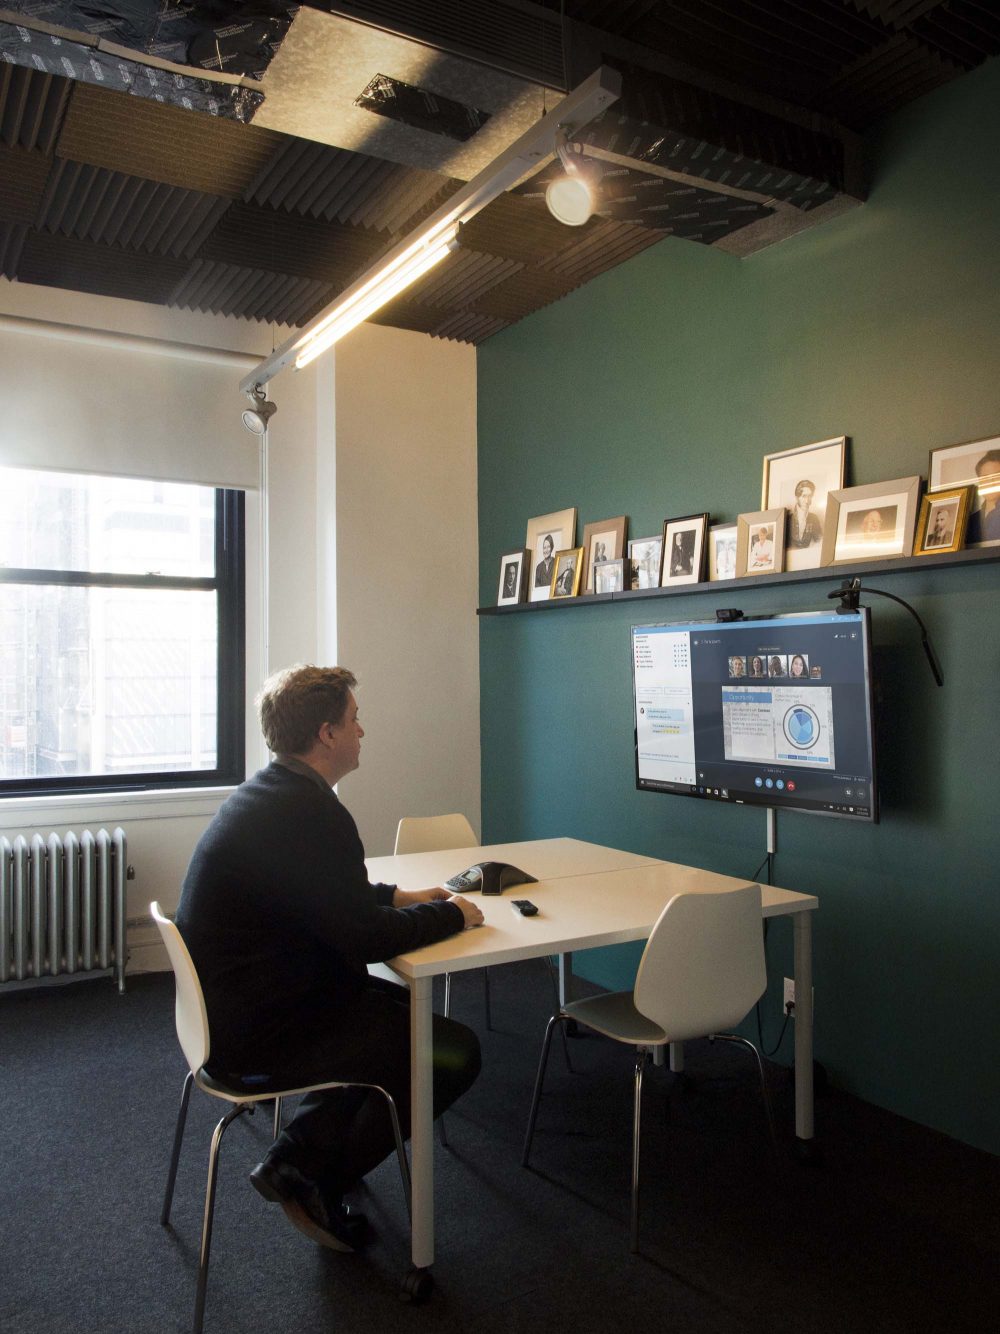 The Parlor enables teleconferencing capabilities without excess noise from the office